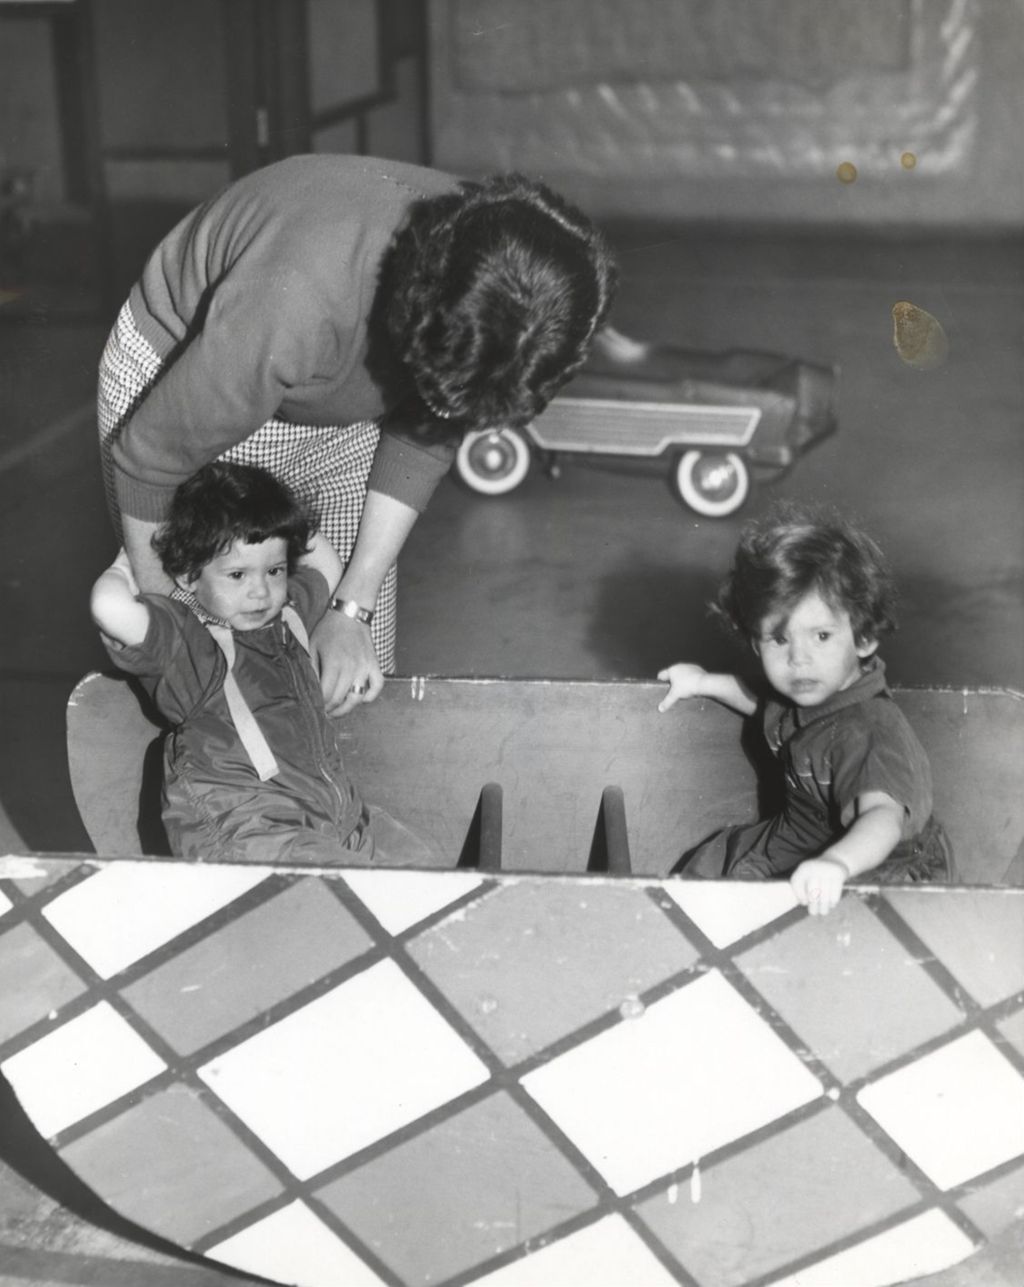 Children playing in a "rocking boat" with a woman watching